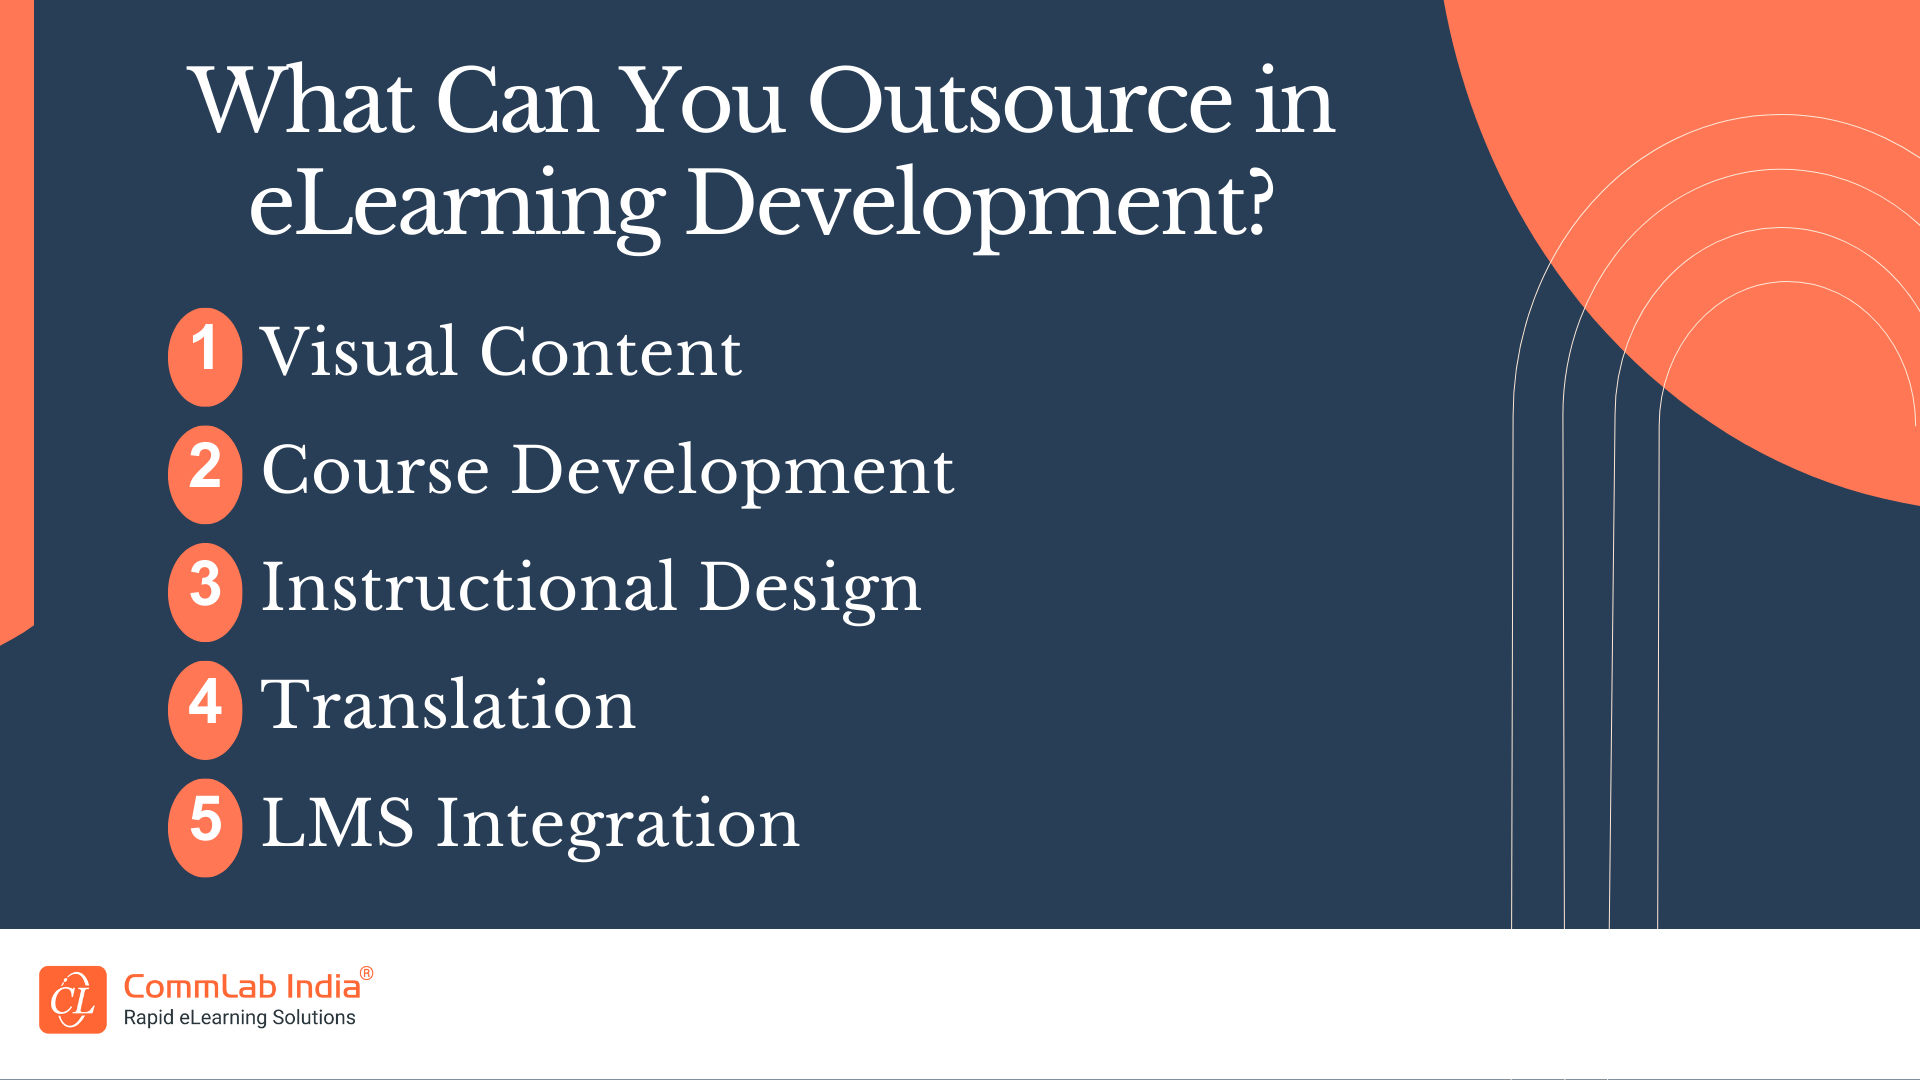 eLearning Development Components That You Can Outsource